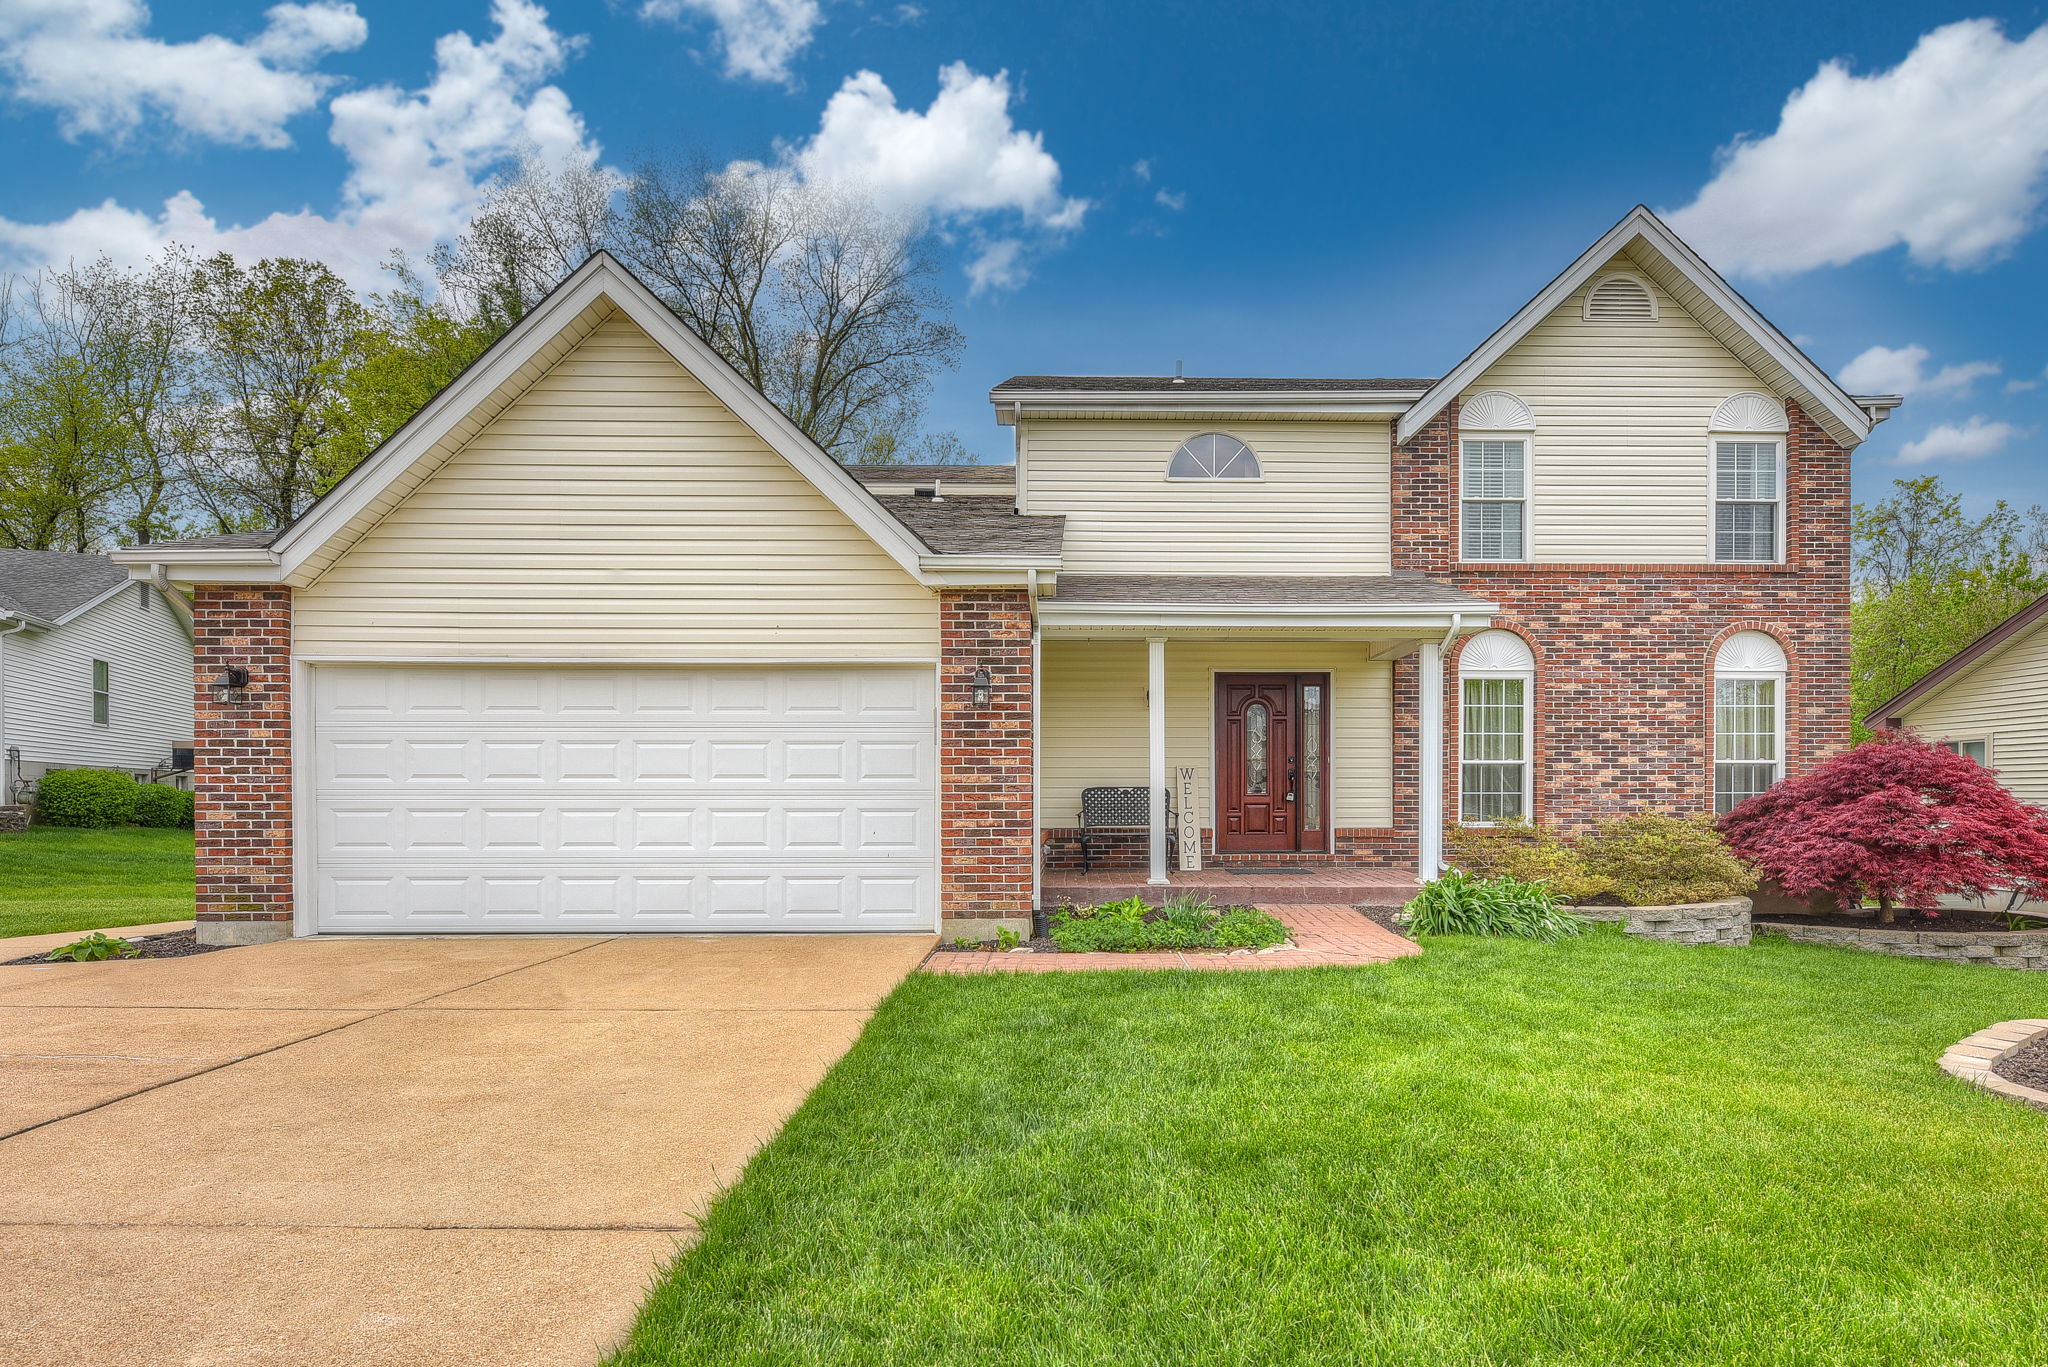  5853 Morning Field Drive, St. Louis, MO 63128, US